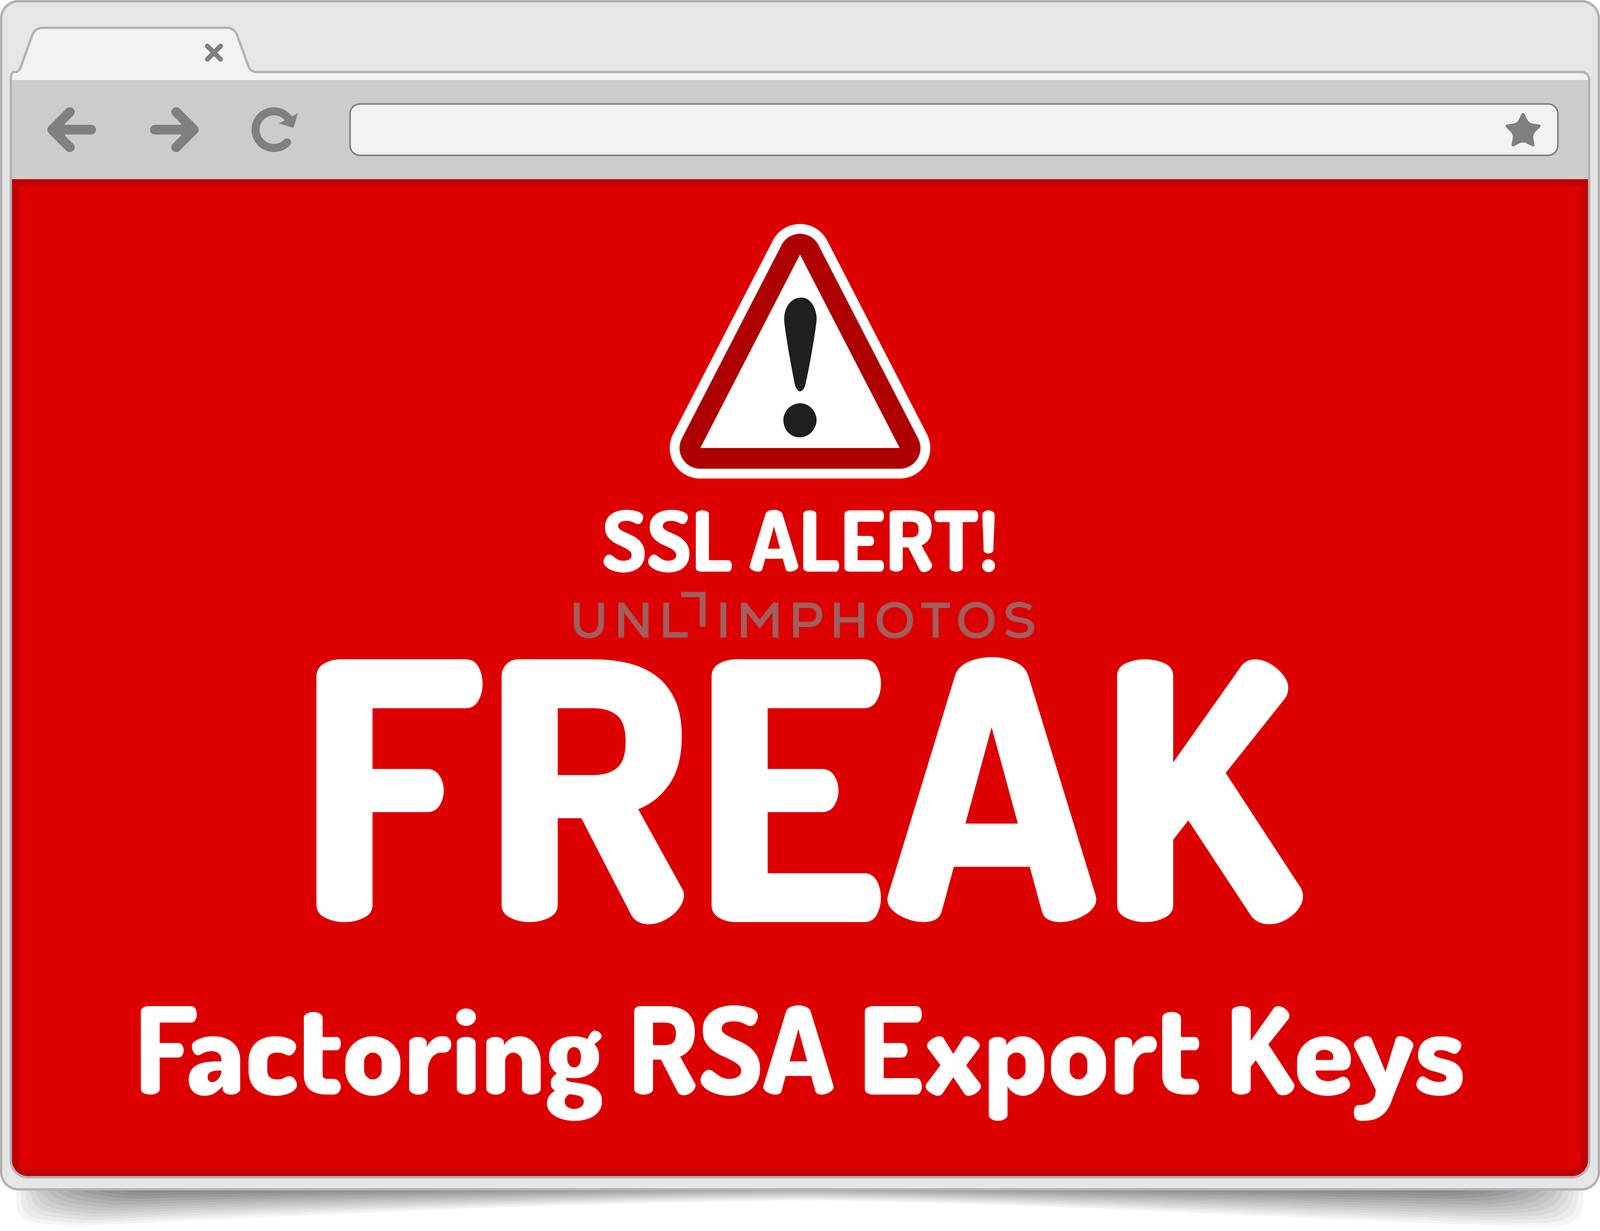 FREAK - Factoring RSA Export Keys Security - Warning in simple opened browser with shadow on white background 